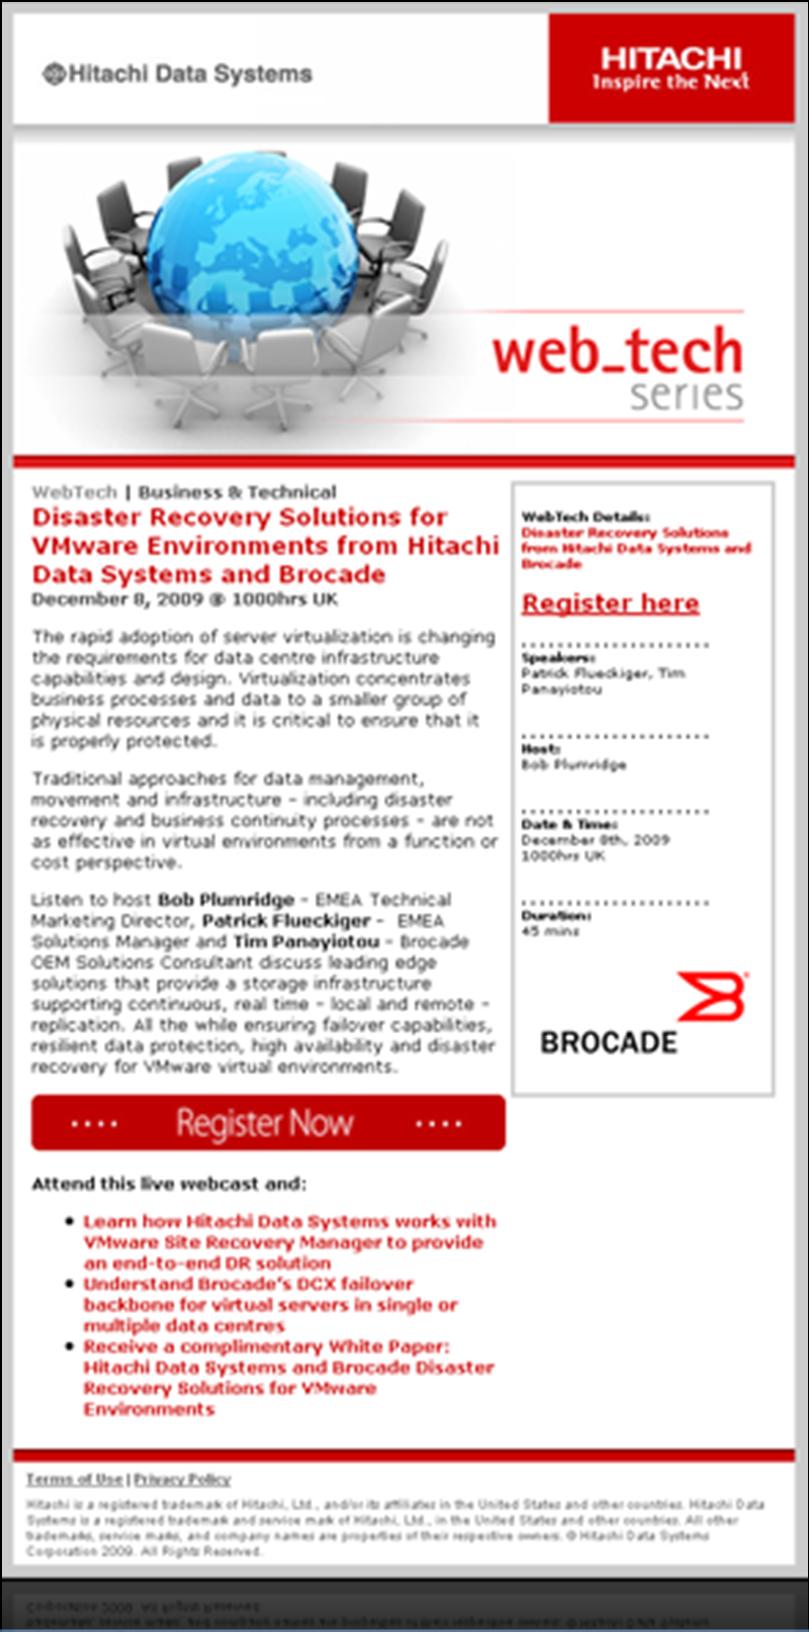 HITACHI USES EMAIL TO DRIVE ATTENDANCE FOR ITS WebTech WEBINAR SERIES